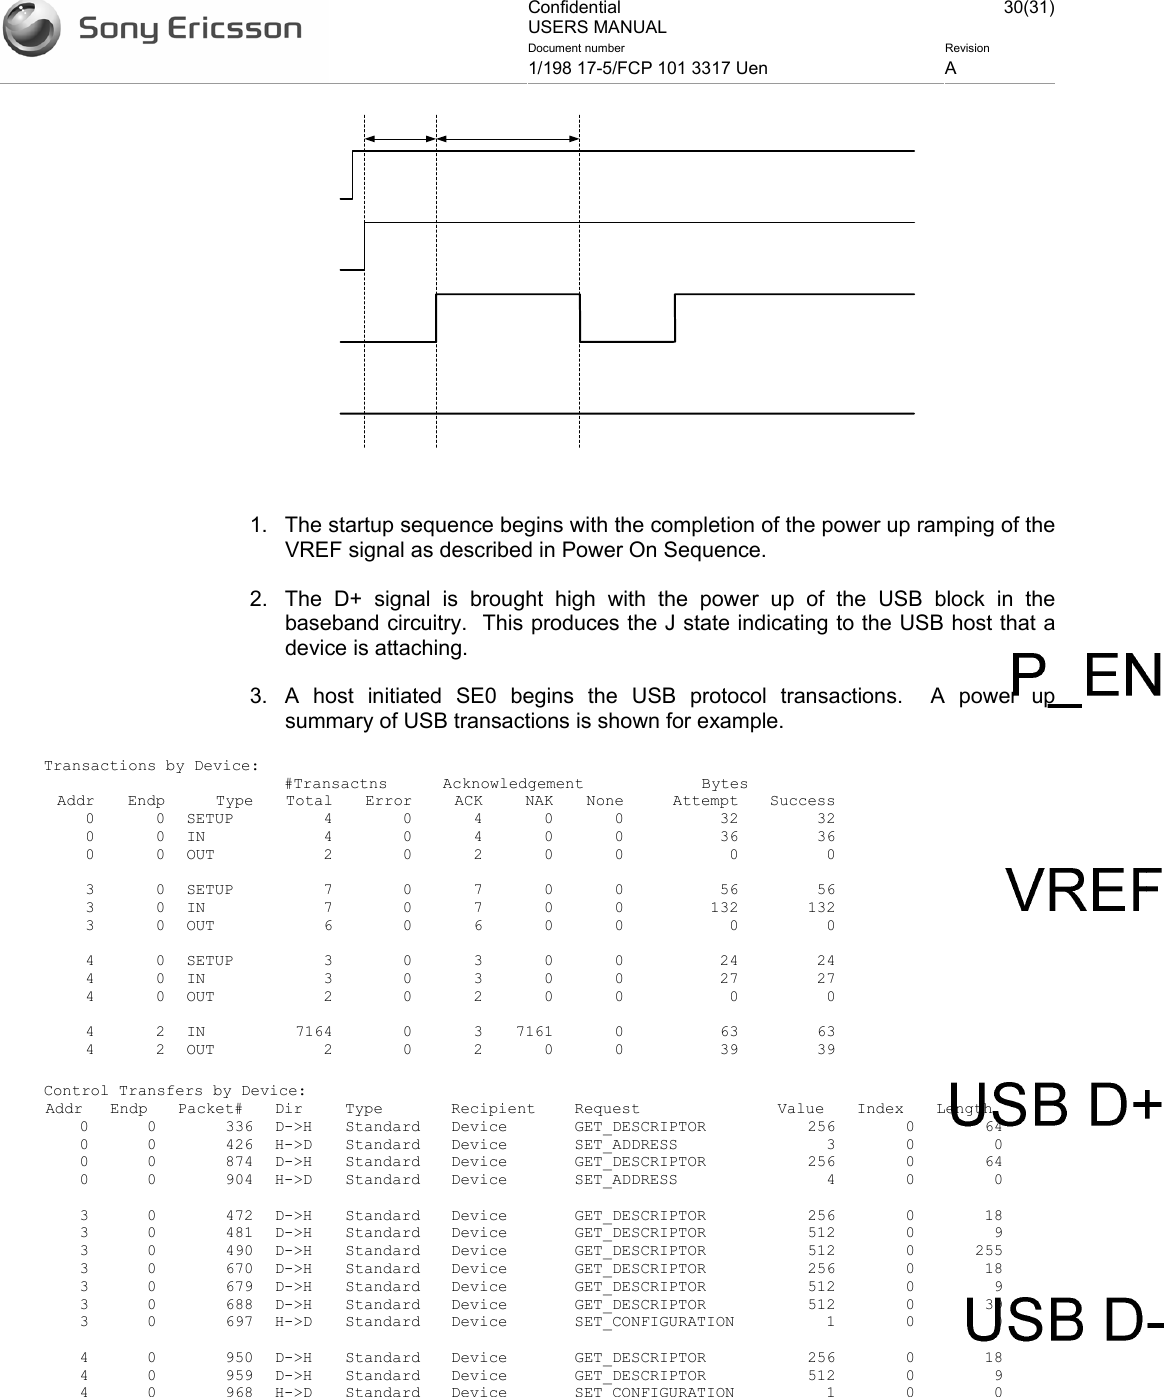 Confidential USERS MANUAL 30(31)Document number  Revision 1/198 17-5/FCP 101 3317 Uen  A     1.  The startup sequence begins with the completion of the power up ramping of the VREF signal as described in Power On Sequence. 2.  The D+ signal is brought high with the power up of the USB block in the baseband circuitry.  This produces the J state indicating to the USB host that a device is attaching. 3.  A host initiated SE0 begins the USB protocol transactions.  A power up summary of USB transactions is shown for example. Transactions by Device:        #Transactns   Acknowledgement        Bytes Addr Endp  Type Total Error  ACK  NAK None  Attempt Success 0 0 SETUP  4  0 4 0 0  32  32 0 0 IN  4  0 4 0 0  36  36 0 0 OUT  2  0 2 0 0  0  0                3 0 SETUP  7  0 7 0 0  56  56 3 0 IN  7  0 7 0 0  132  132 3 0 OUT  6  0 6 0 0  0  0                4 0 SETUP  3  0 3 0 0  24  24 4 0 IN  3  0 3 0 0  27  27 4 0 OUT  2  0 2 0 0  0  0                4 2 IN  7164  0 3 7161 0  63  63 4 2 OUT  2  0 2 0 0  39  39 Control Transfers by Device: Addr Endp Packet# Dir  Type  Recipient  Request  Value Index Length 0 0  336 D-&gt;H Standard Device  GET_DESCRIPTOR  256  0  64 0 0  426 H-&gt;D Standard Device  SET_ADDRESS  3  0  0 0 0  874 D-&gt;H Standard Device  GET_DESCRIPTOR  256  0  64 0 0  904 H-&gt;D Standard Device  SET_ADDRESS  4  0  0                3 0  472 D-&gt;H Standard Device  GET_DESCRIPTOR  256  0  18 3 0  481 D-&gt;H Standard Device  GET_DESCRIPTOR  512  0  9 3 0  490 D-&gt;H Standard Device  GET_DESCRIPTOR  512  0  255 3 0  670 D-&gt;H Standard Device  GET_DESCRIPTOR  256  0  18 3 0  679 D-&gt;H Standard Device  GET_DESCRIPTOR  512  0  9 3 0  688 D-&gt;H Standard Device  GET_DESCRIPTOR  512  0  39 3 0  697 H-&gt;D Standard Device  SET_CONFIGURATION  1  0  0                4 0  950 D-&gt;H Standard Device  GET_DESCRIPTOR  256  0  18 4 0  959 D-&gt;H Standard Device  GET_DESCRIPTOR  512  0  9 4 0  968 H-&gt;D Standard Device  SET_CONFIGURATION  1  0  0  